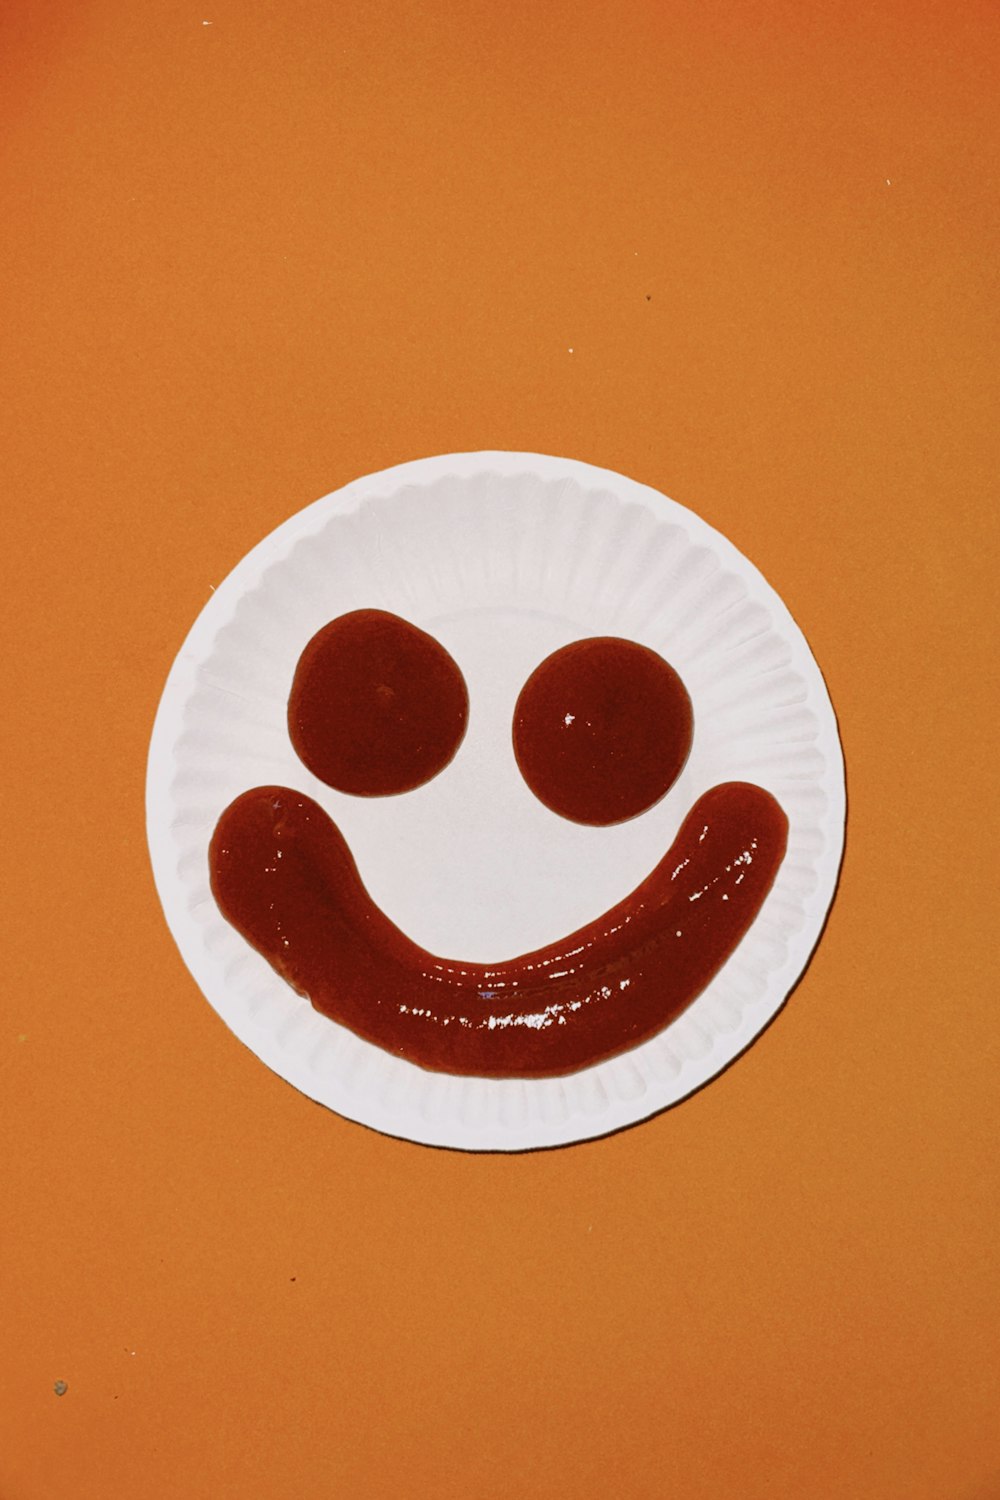 a paper plate with a smiley face drawn on it